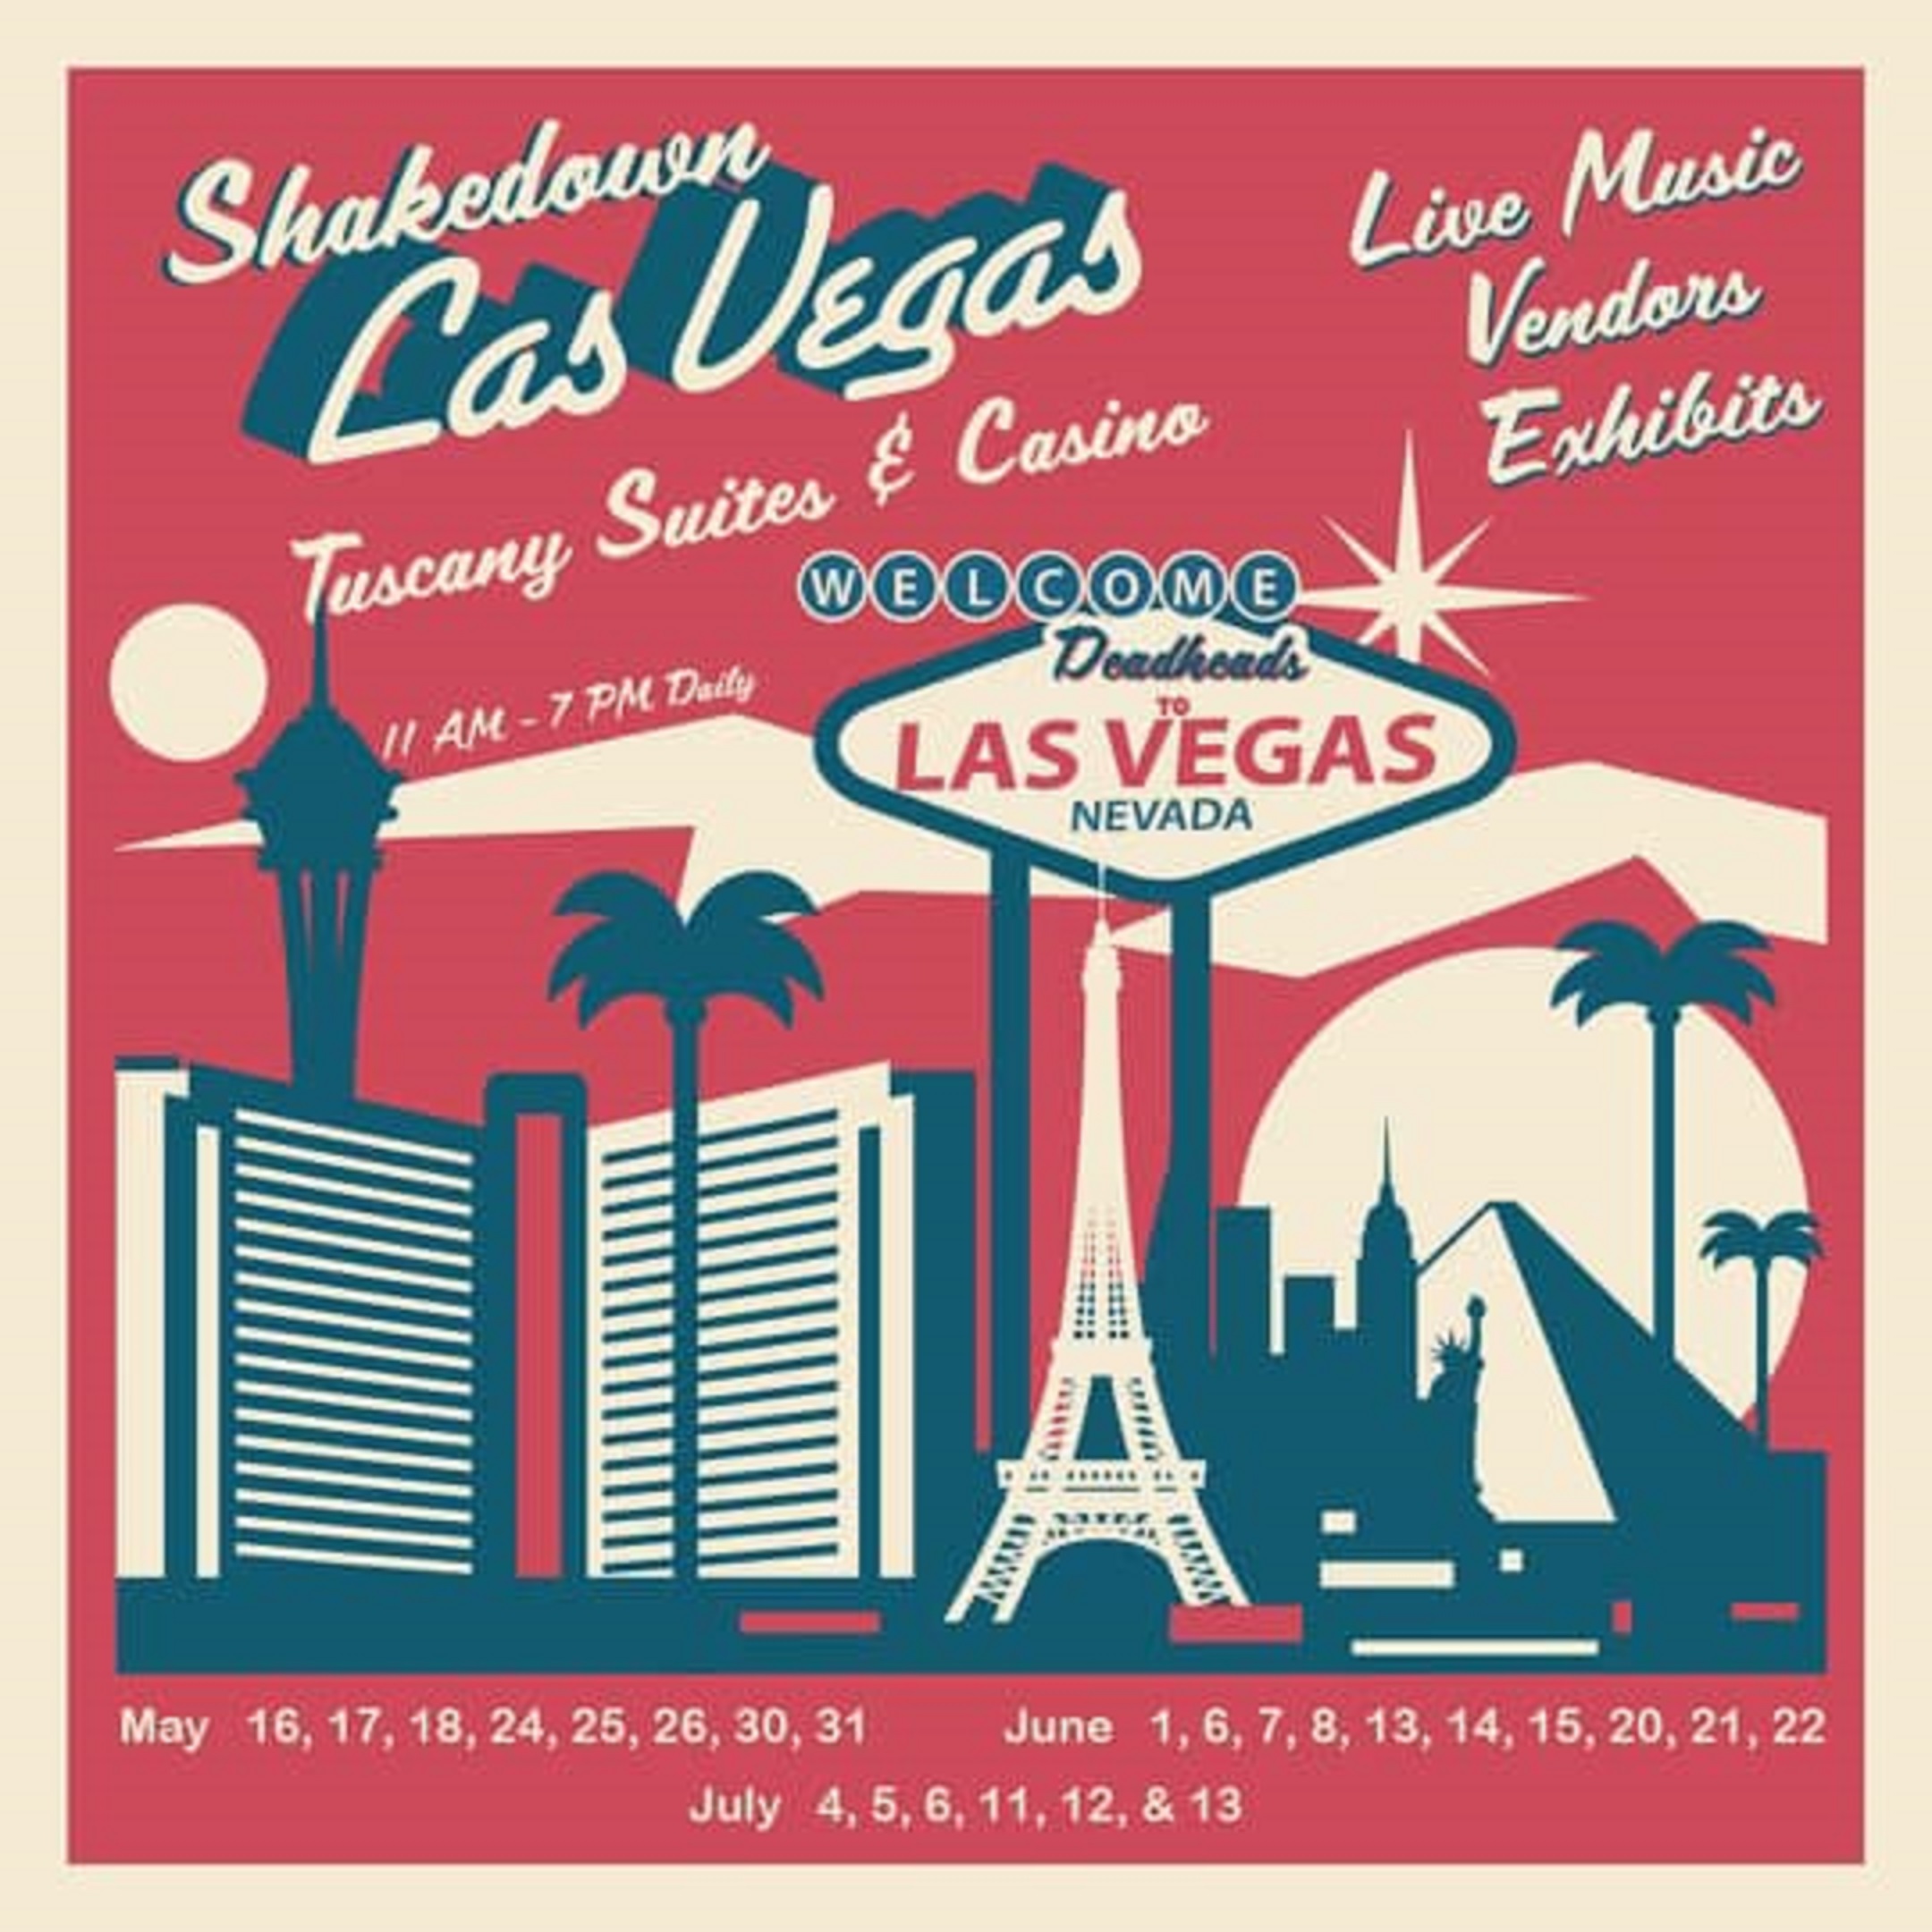 SHAKEDOWN VEGAS STARTS TWO WEEKS FROM TODAY - THURSDAY MAY 16th @ 11am!